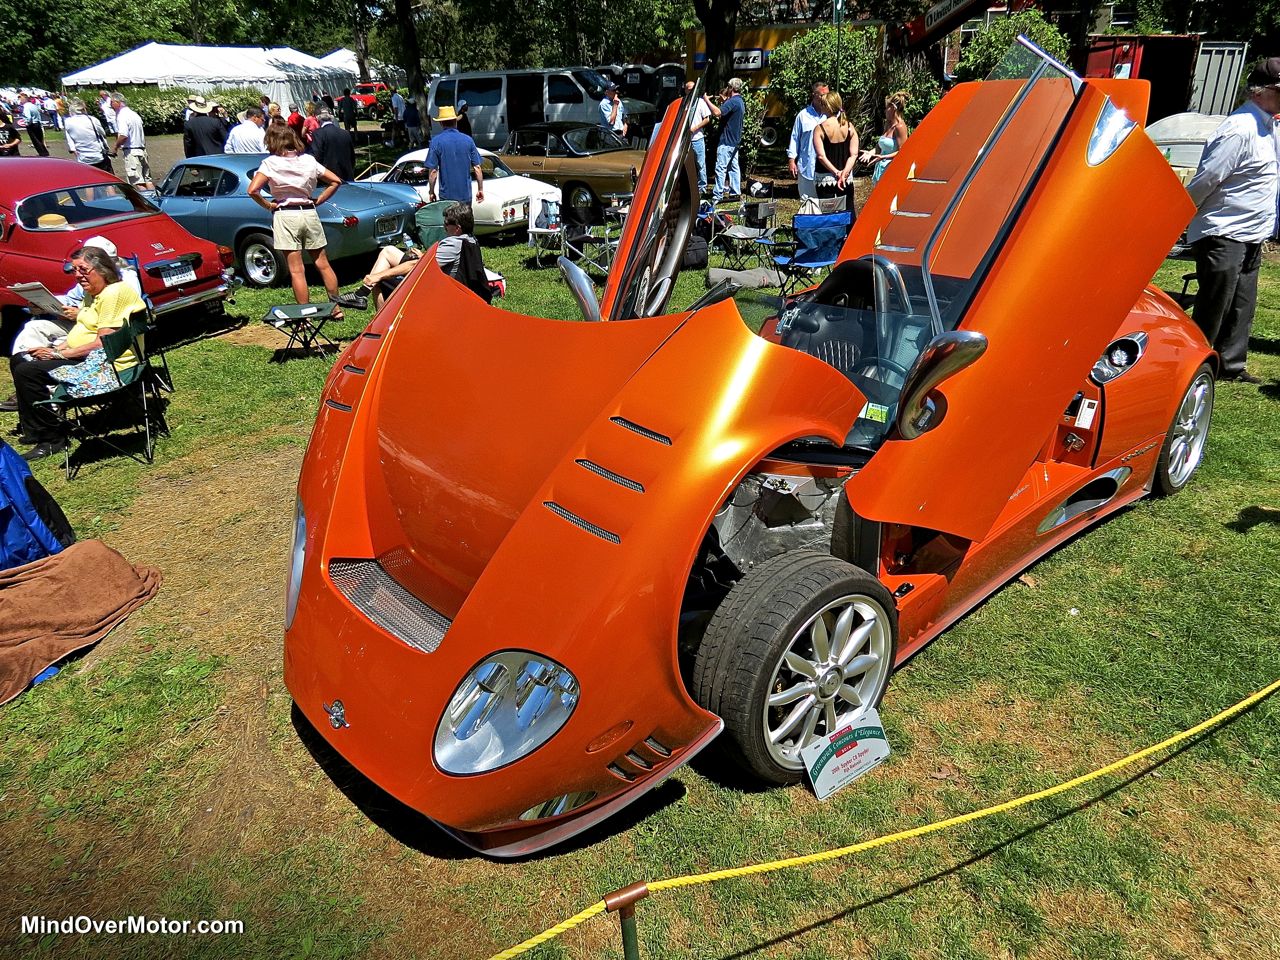 Spyker C8 at the Greenwich Concours